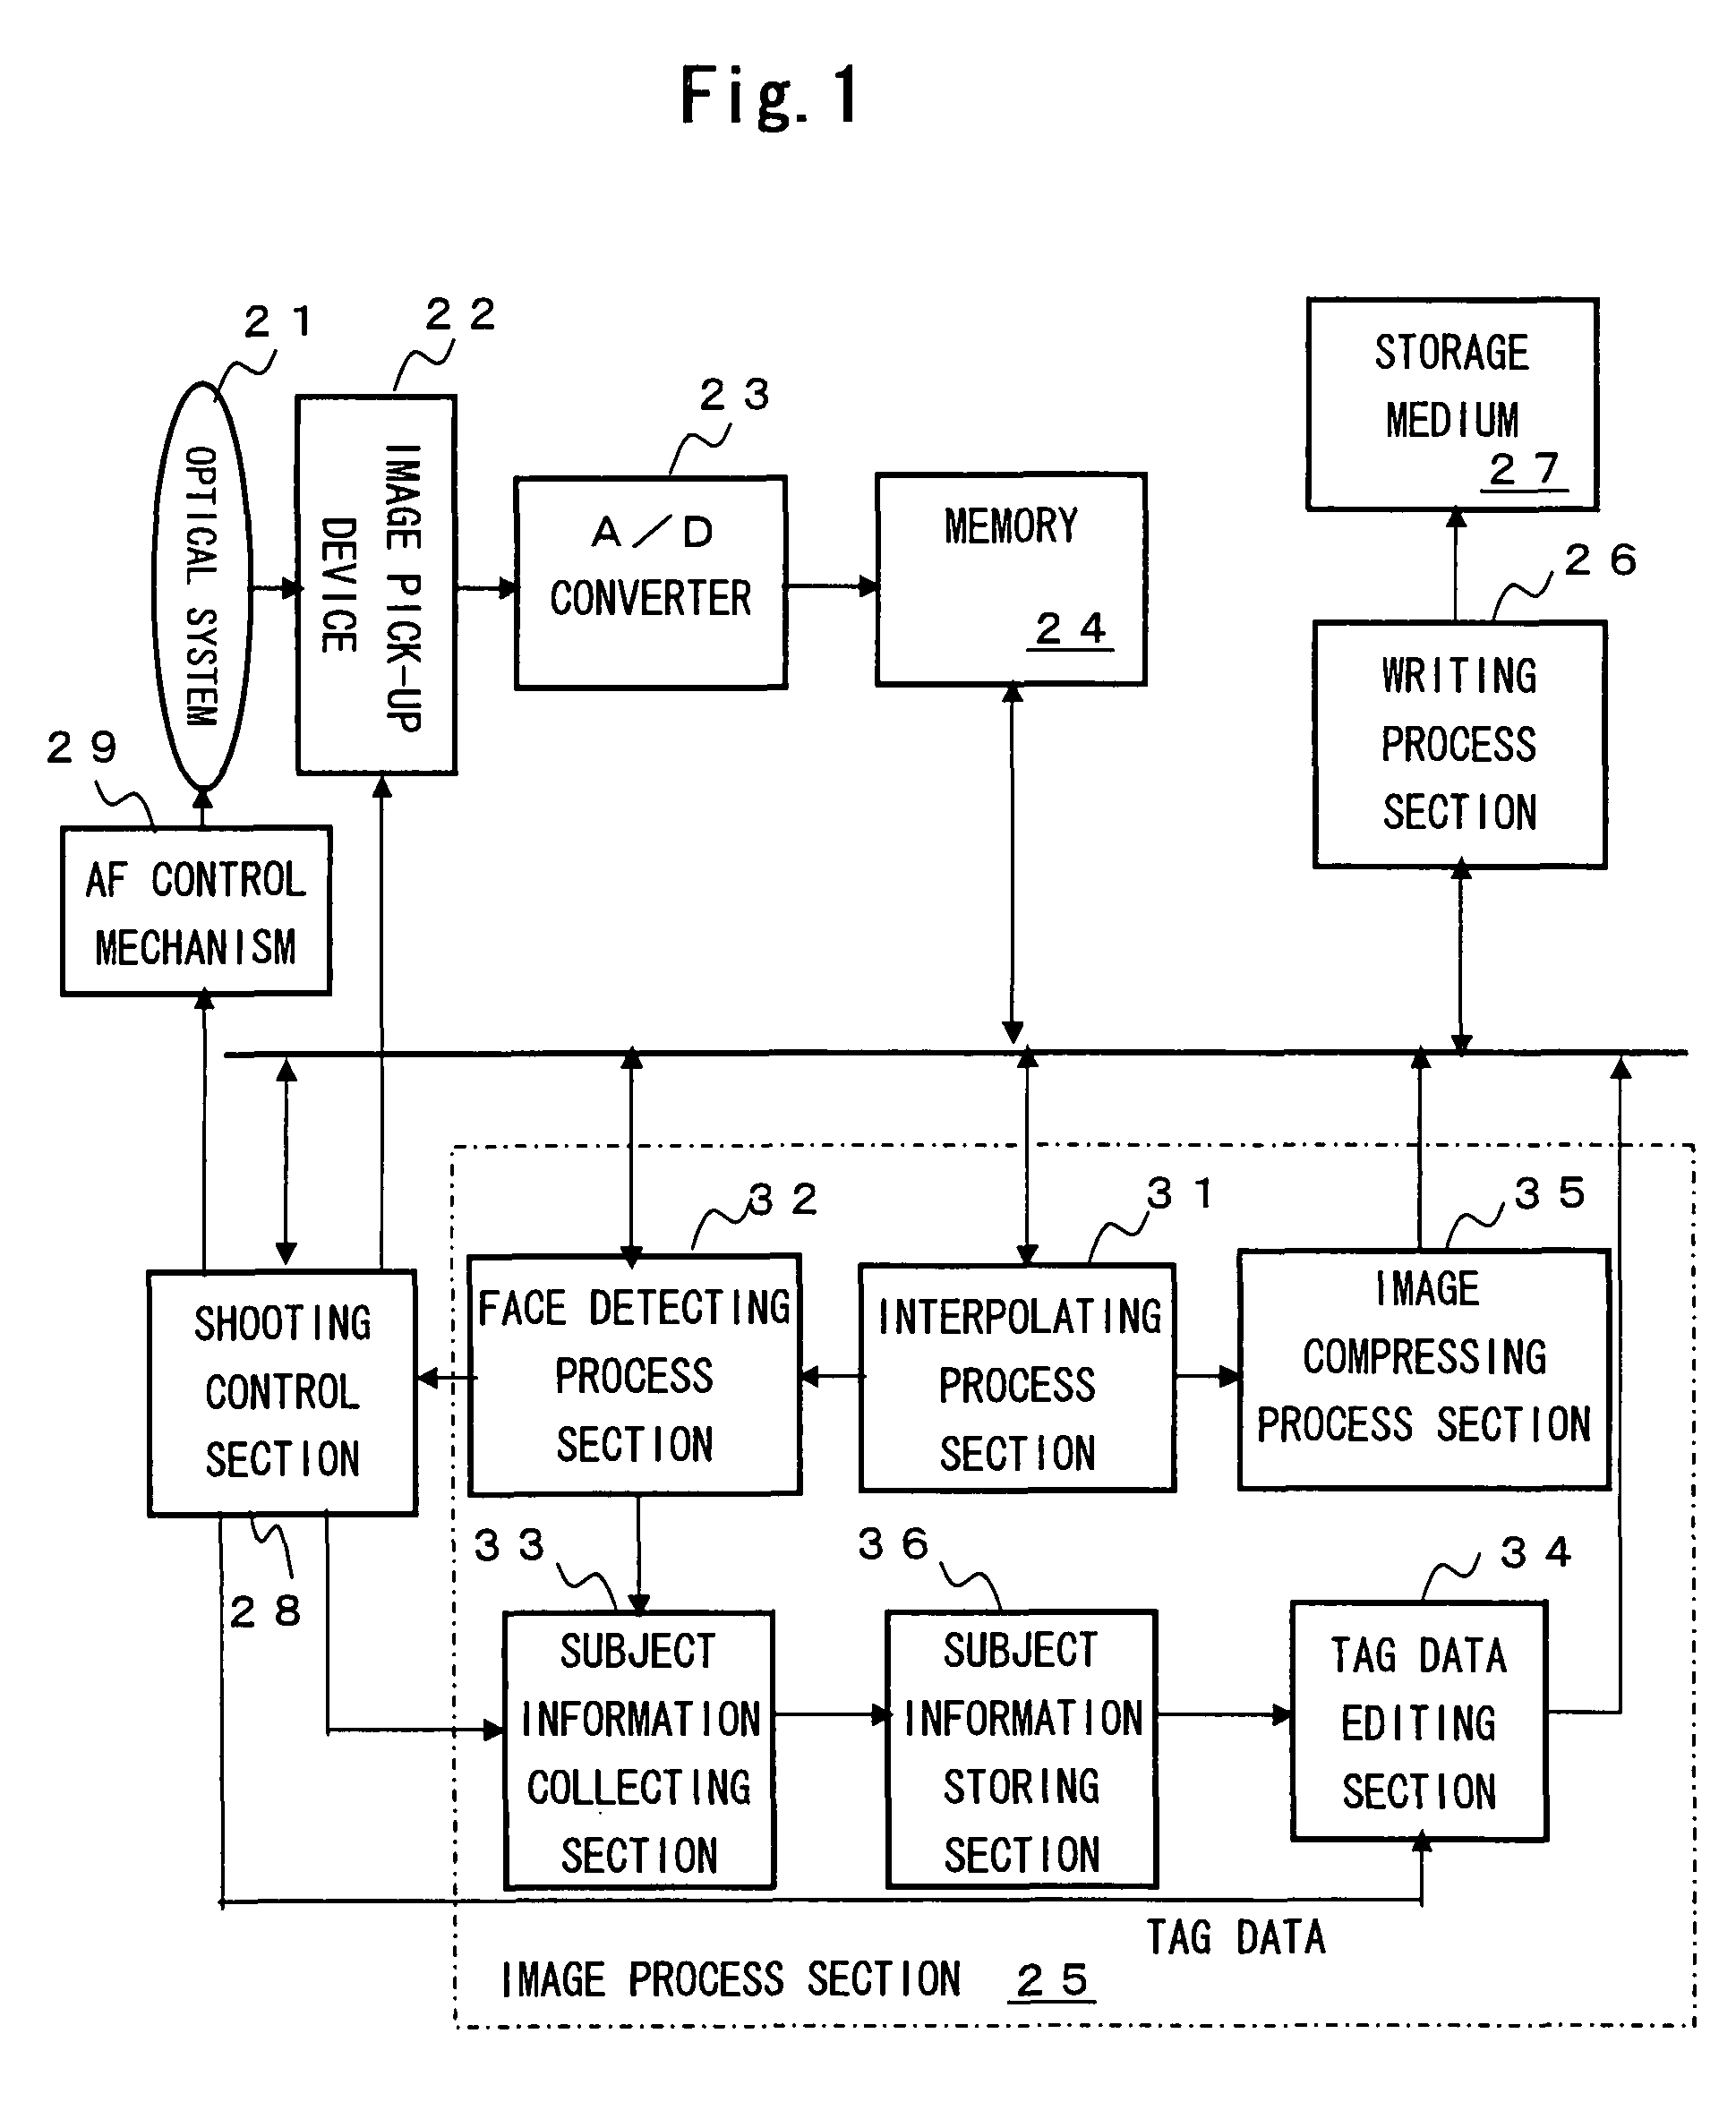 Digital camera that uses object detection information at the time of shooting for processing image data after acquisition of an image